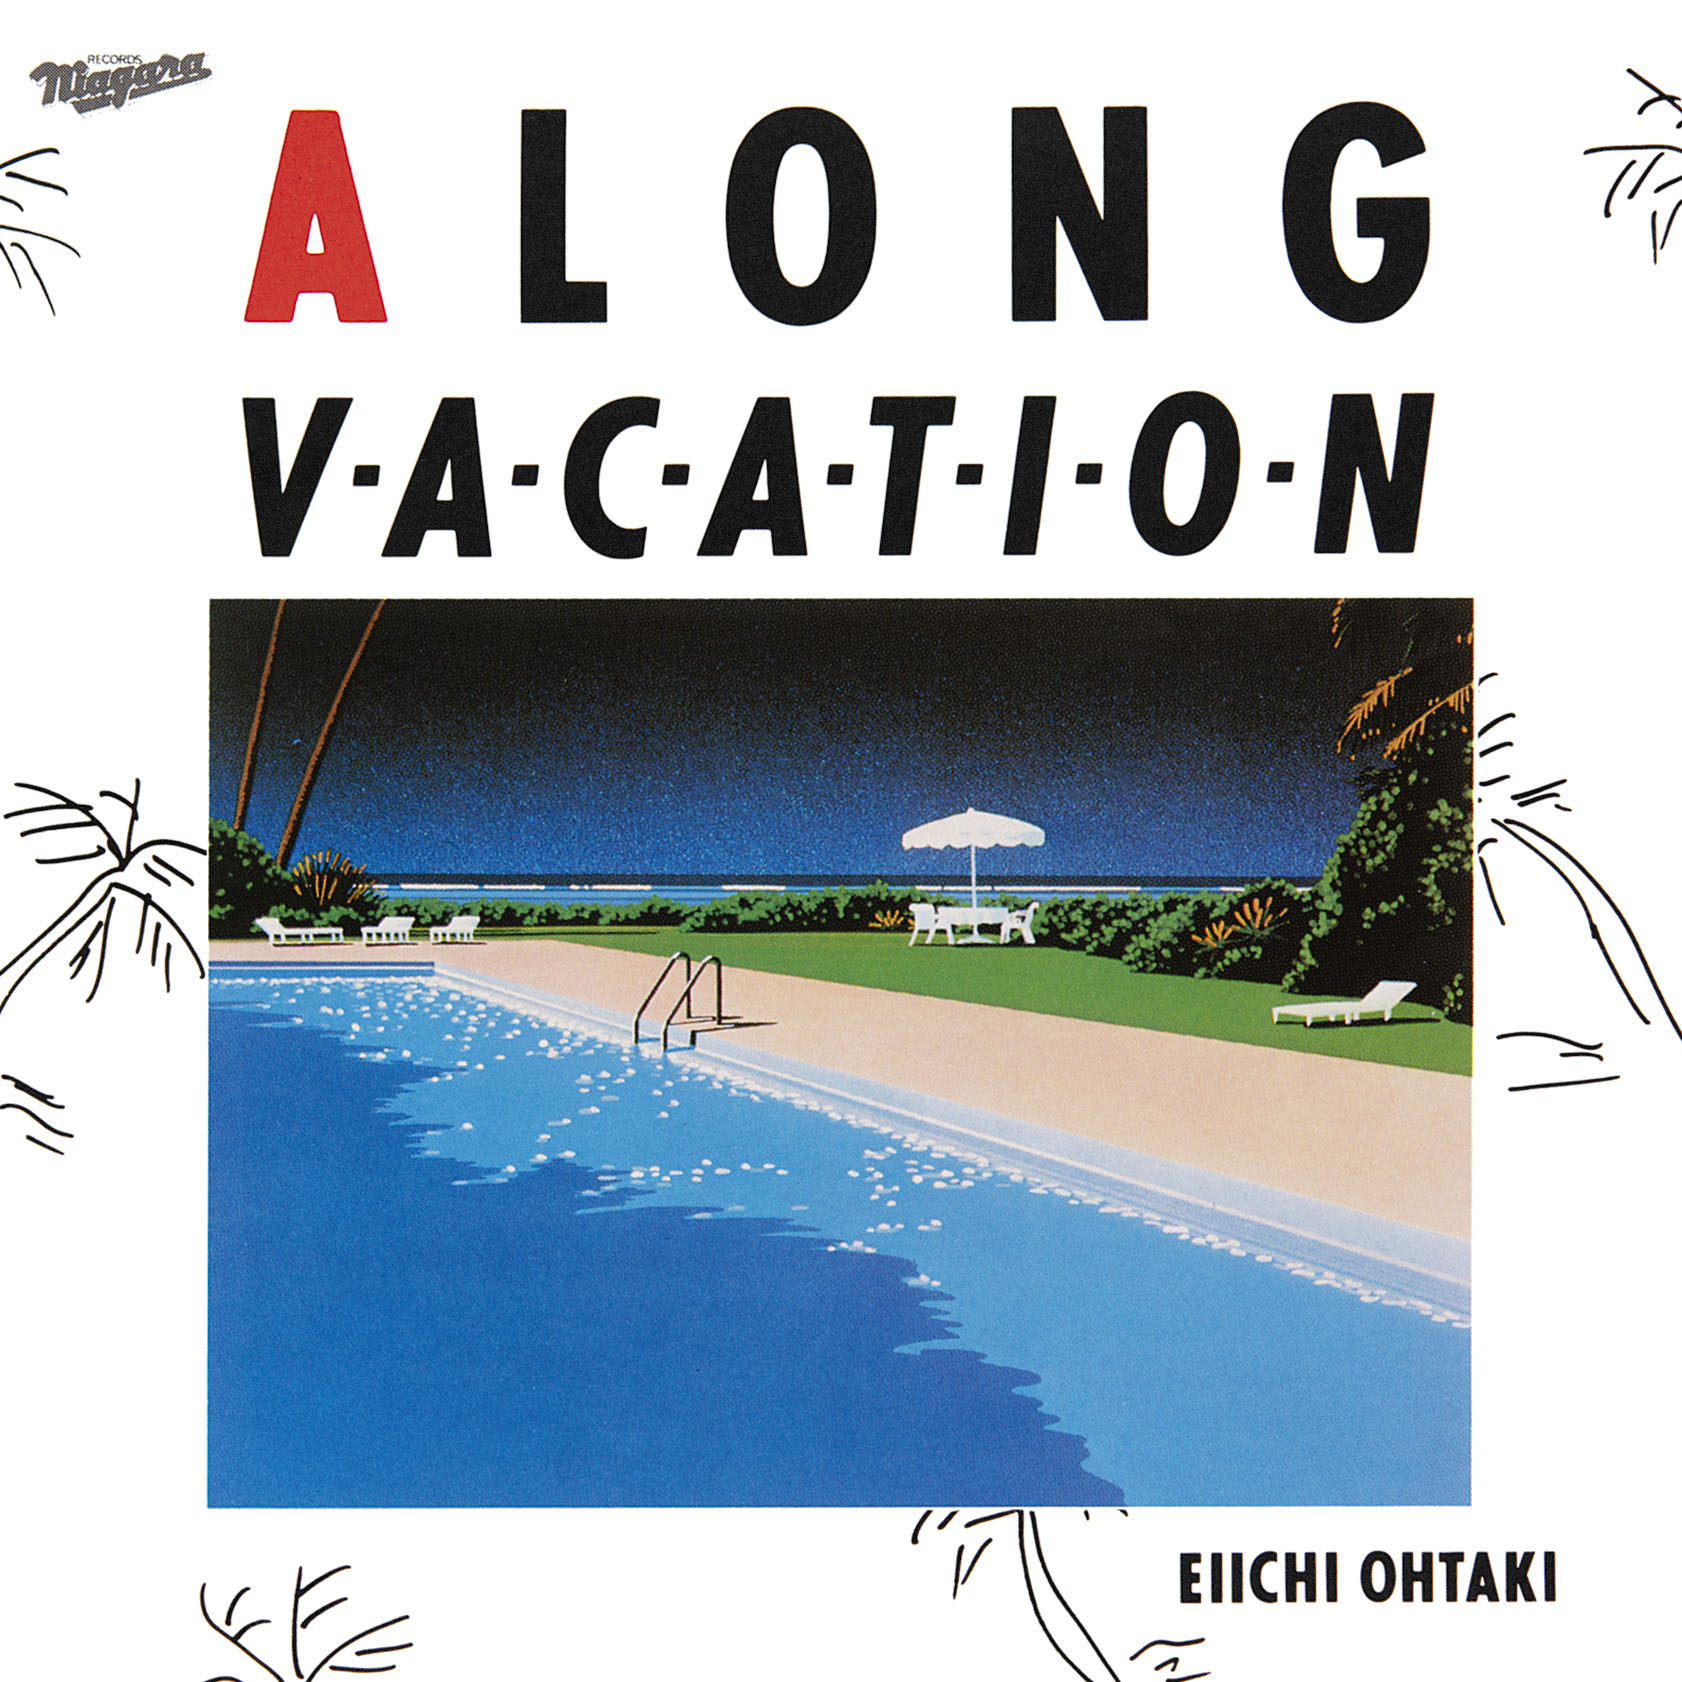 A Long Vacation - 40th Anniversary Edition (Light Blue LP Vinyl) (Limited Edition)